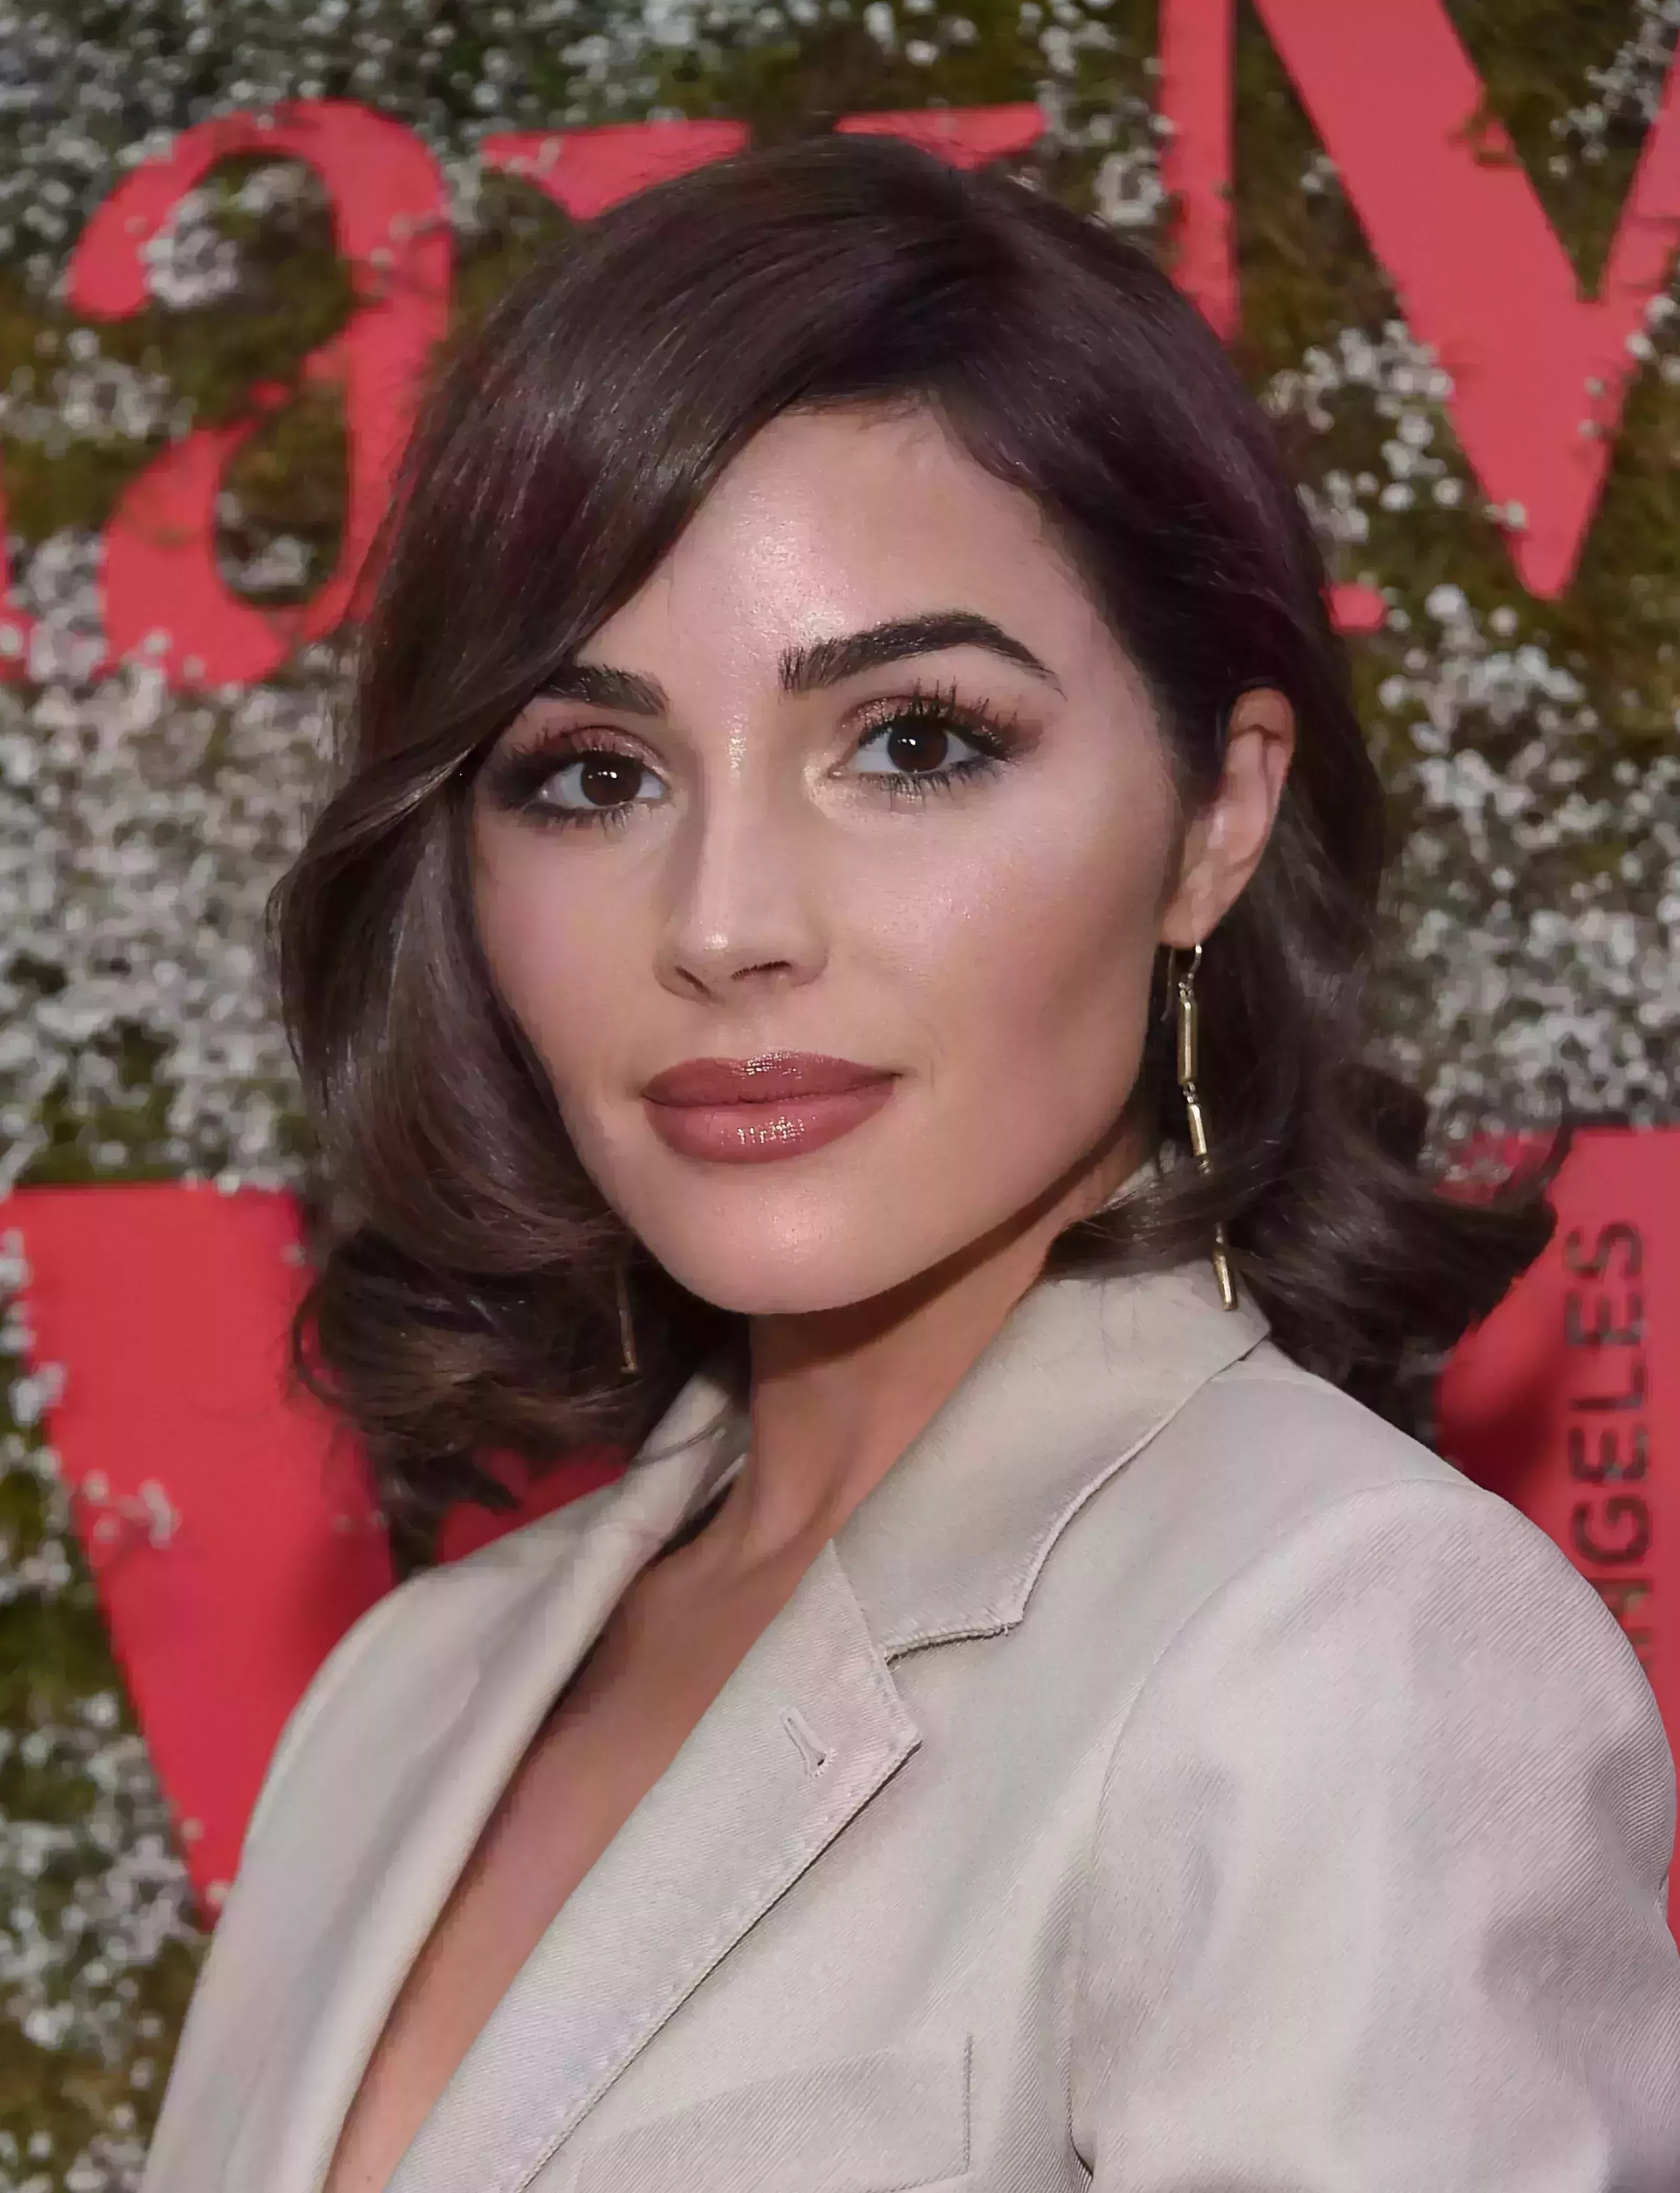 Olivia Culpo’s Side-Parted Curls